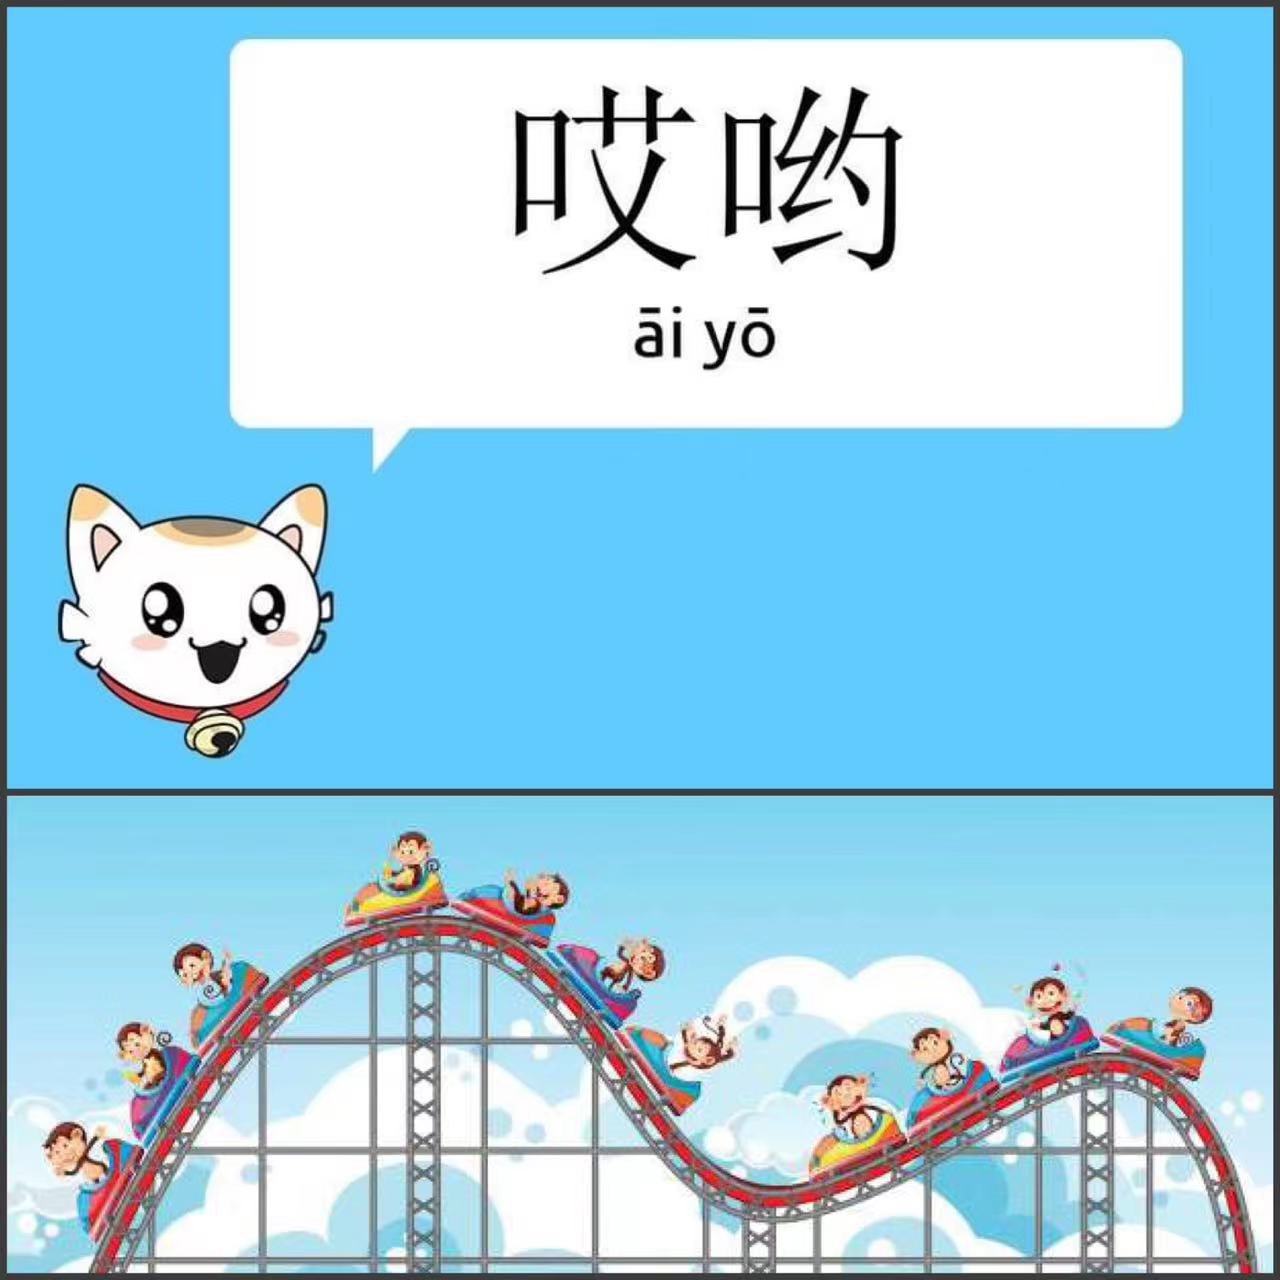 Tsogtgerel Bumerdene's favourite phrase in Chinese: 哎哟 [Āiyō], which can be exclaimed with a rollercoaster of tones in Chinese.